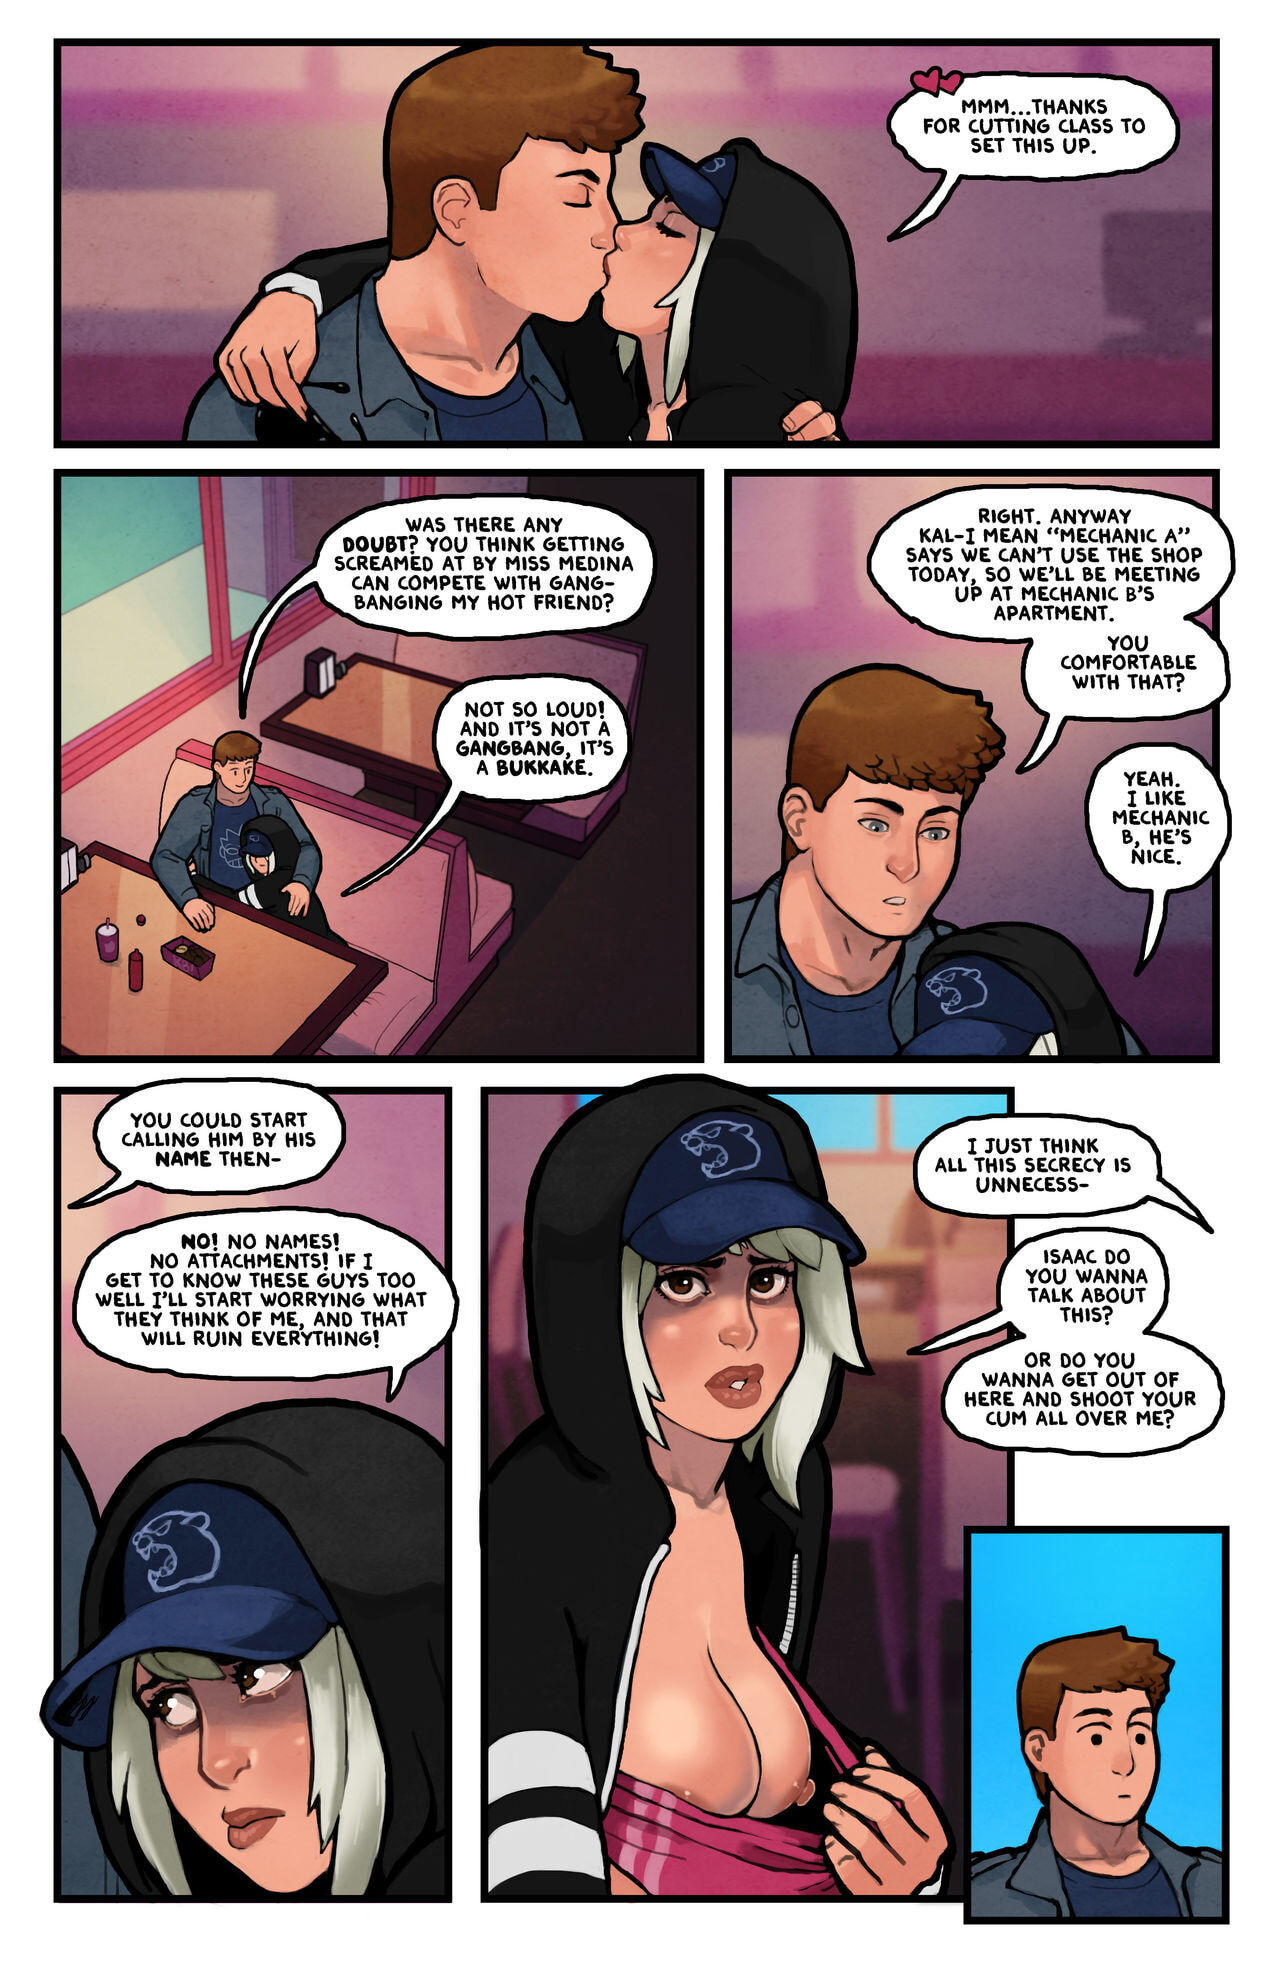 This Romantic World - Page 164